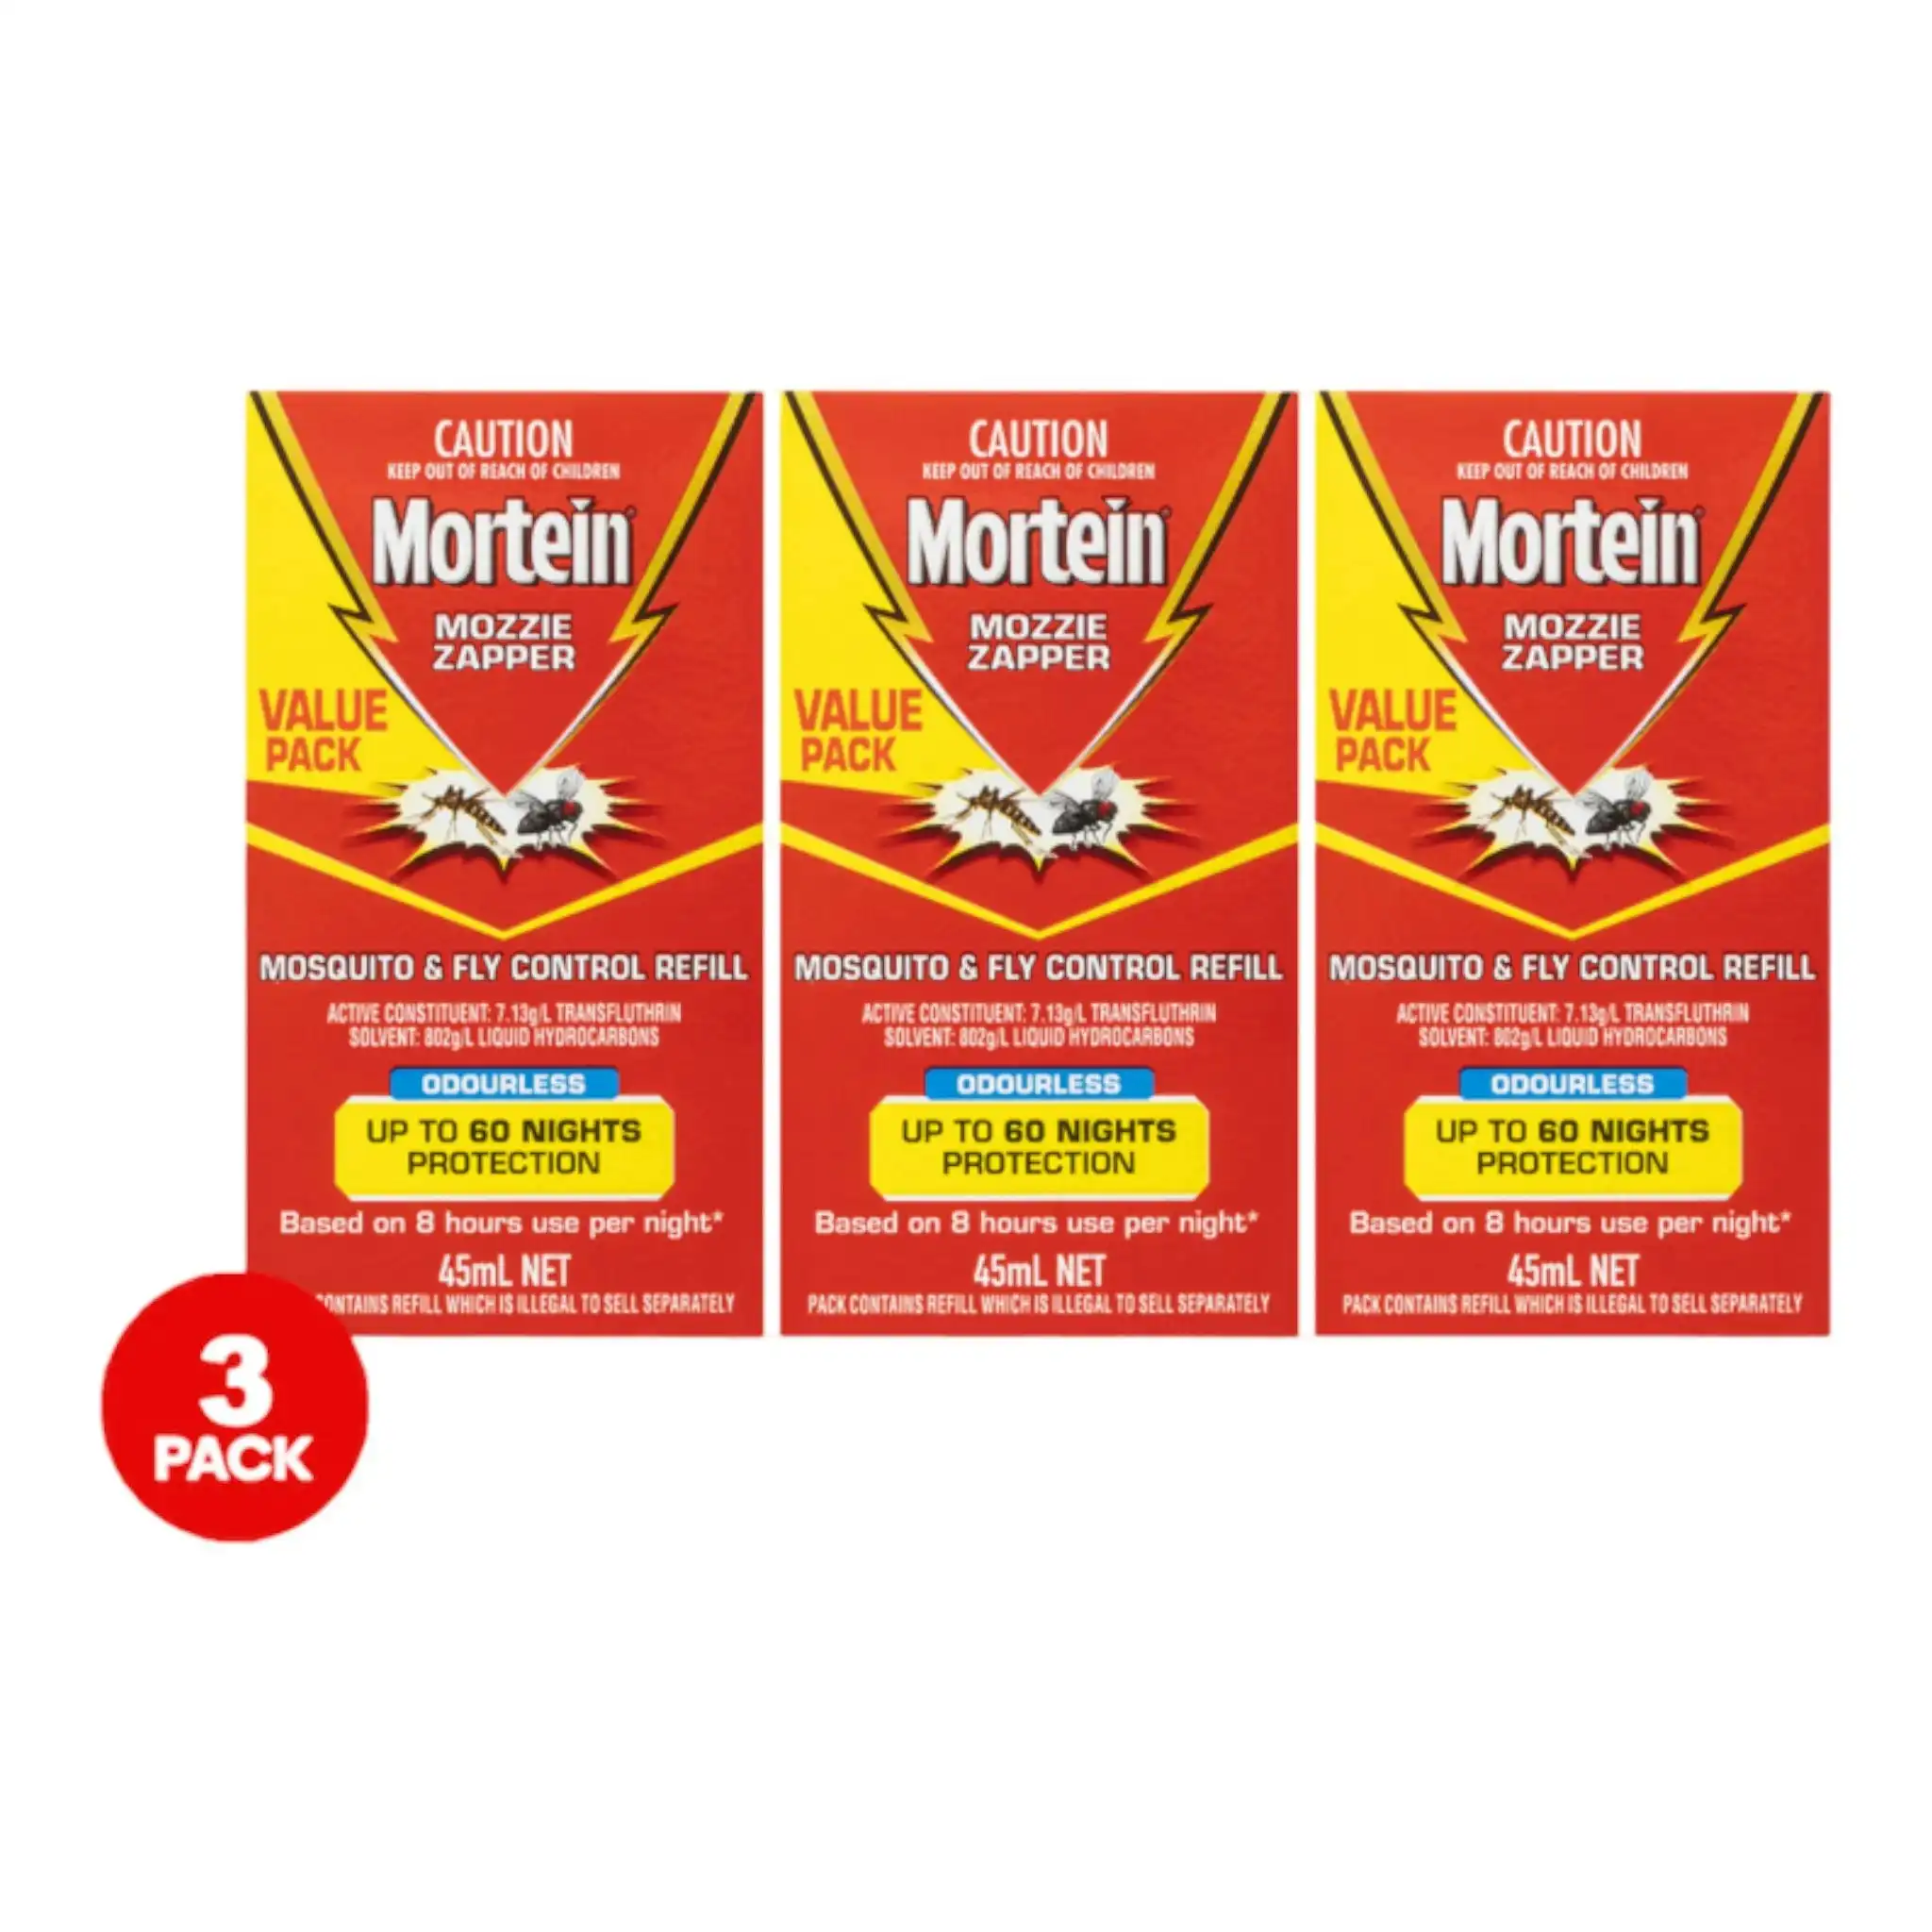 3 Pack Mortein Mosqito/Mozzie Zapper 45ml Refill Odourless